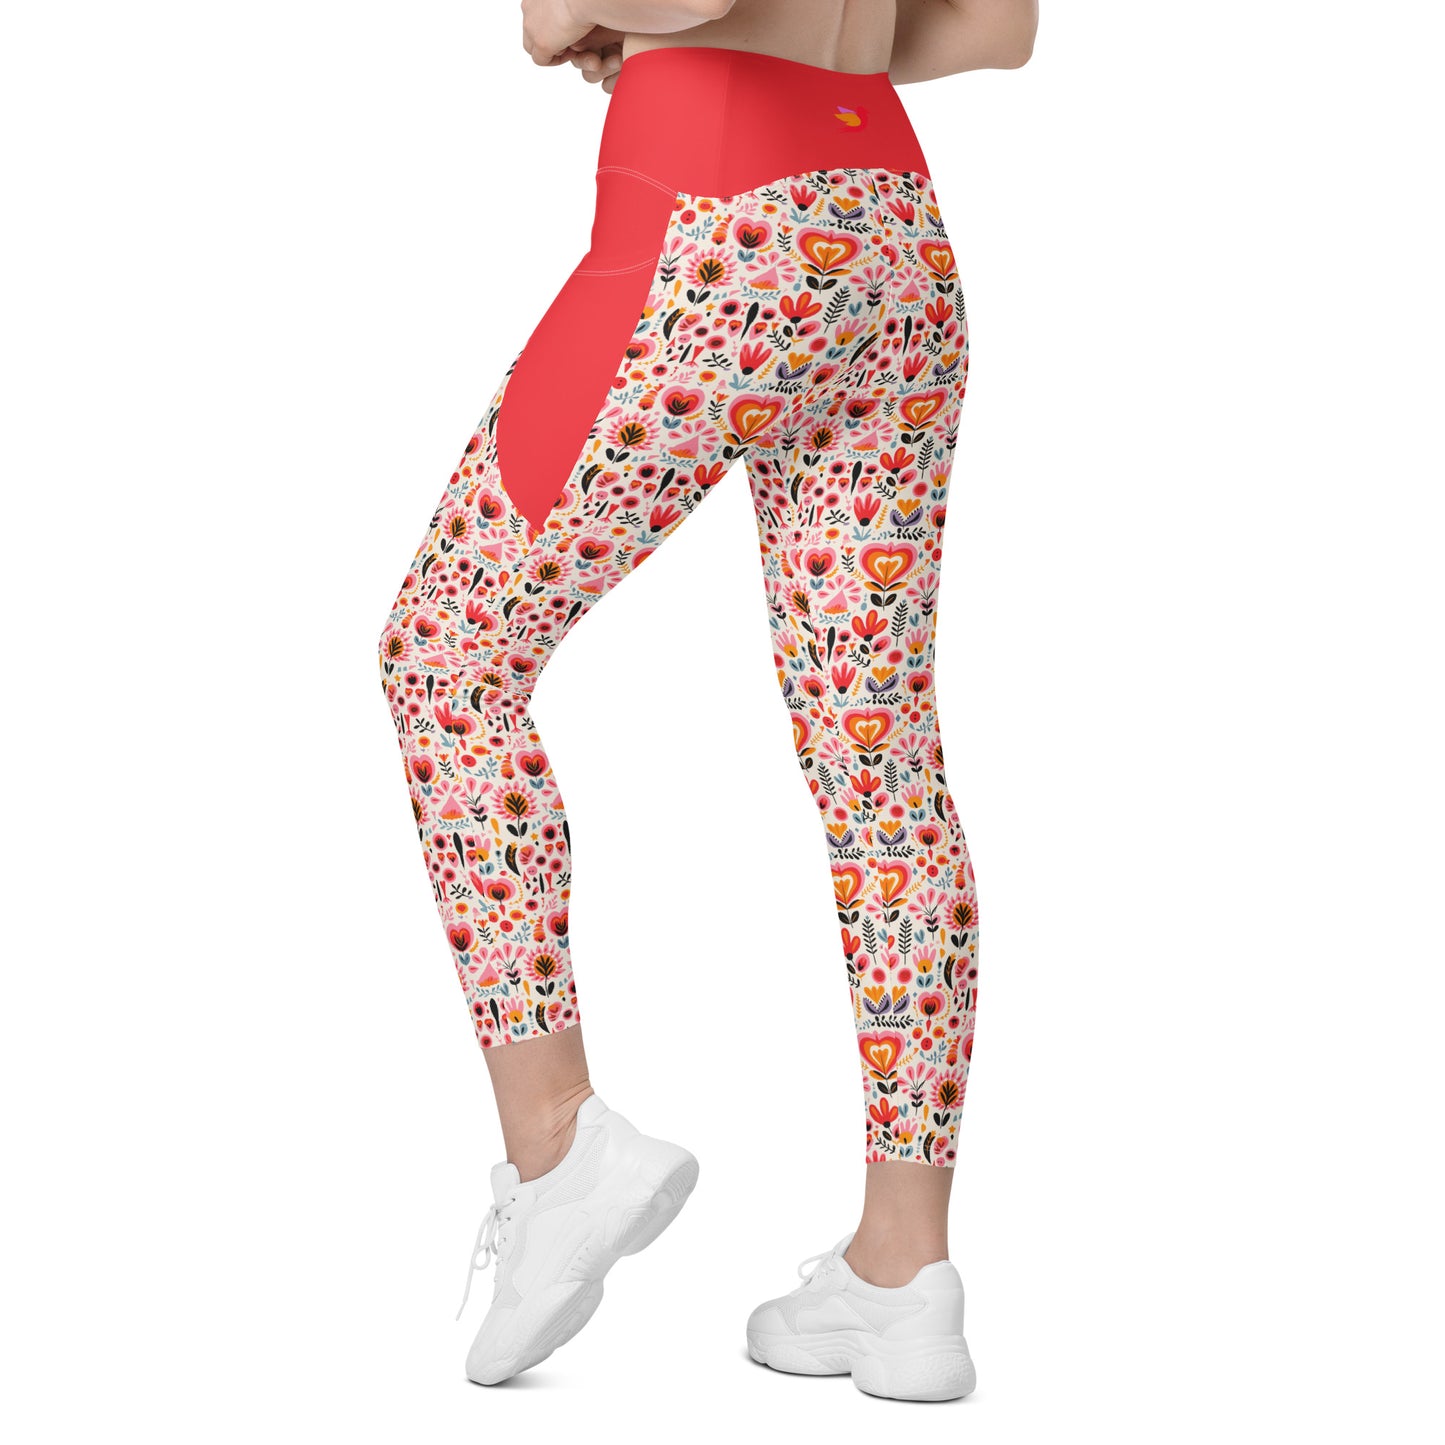 Nord High Waist 7/8 Recycled Yoga Leggings / Yoga Pants with Pockets